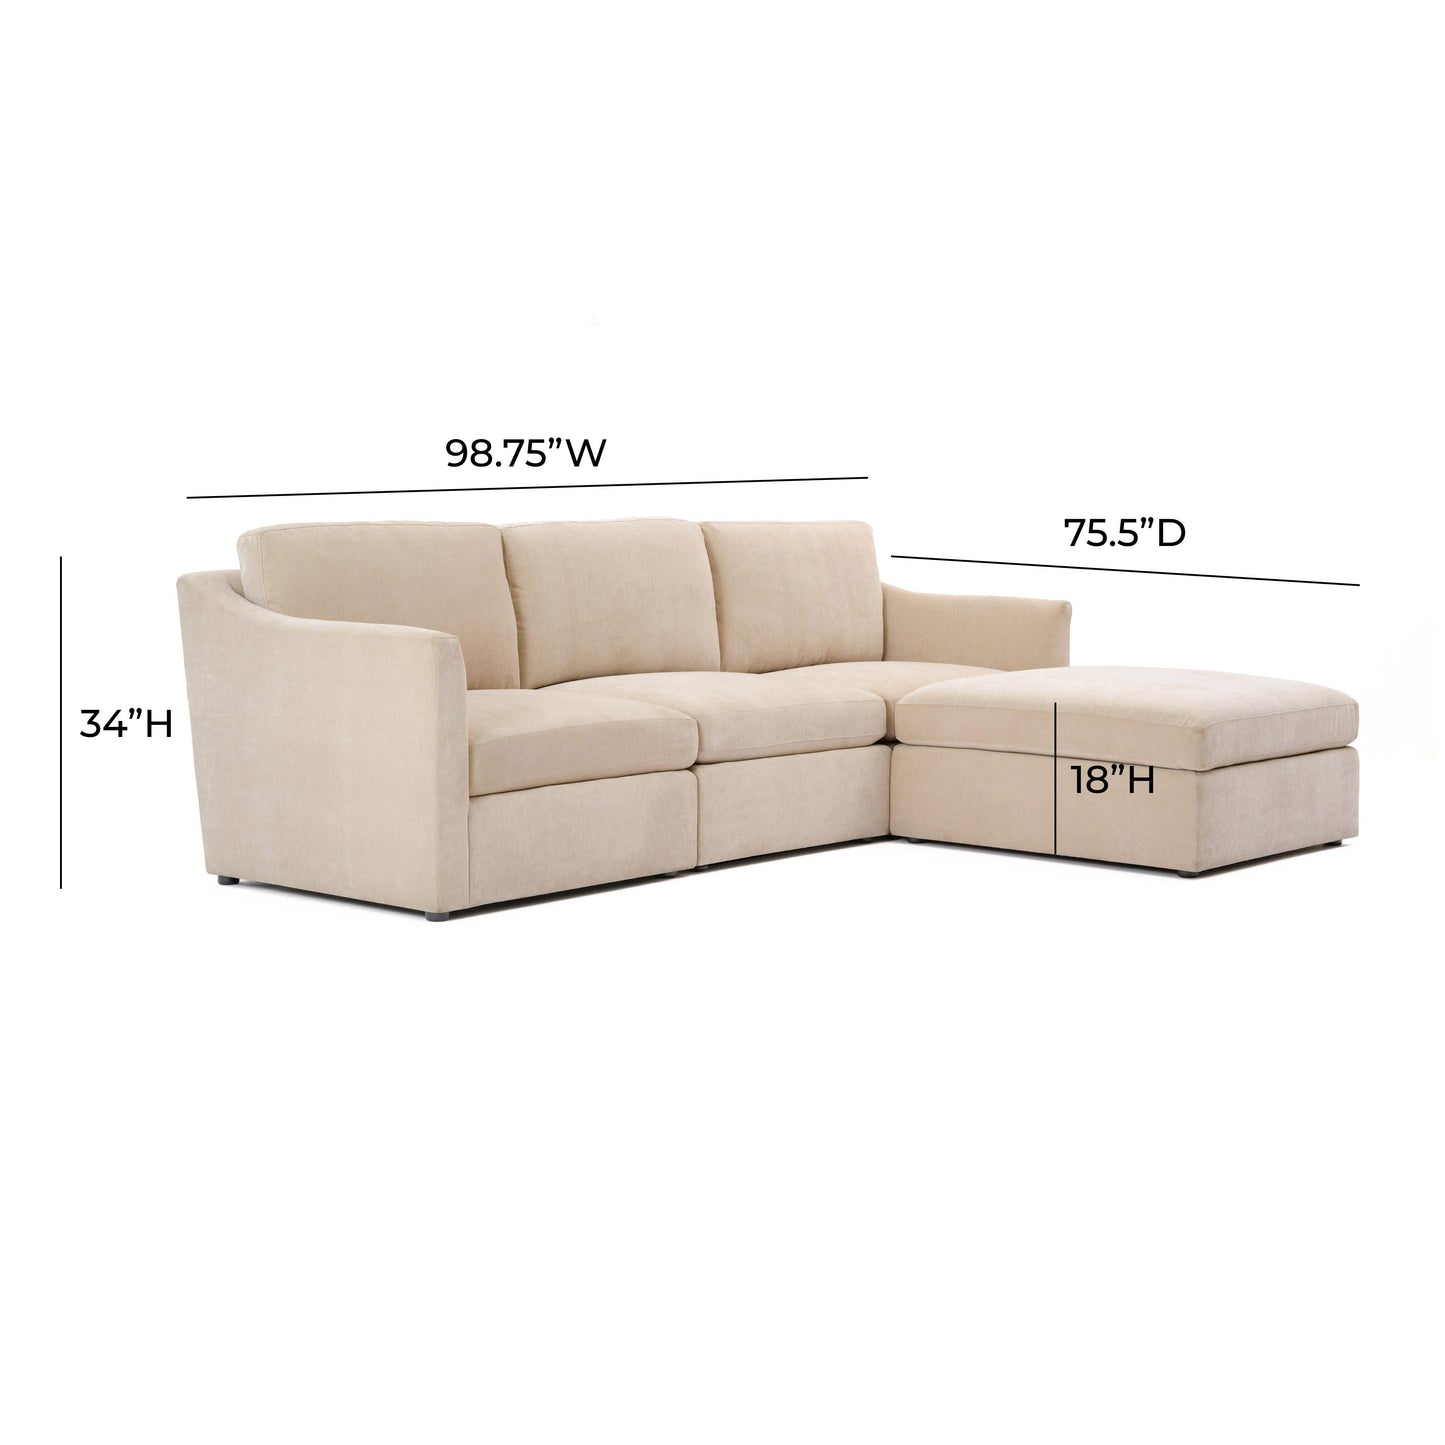 libre beige modular small chaise sectional